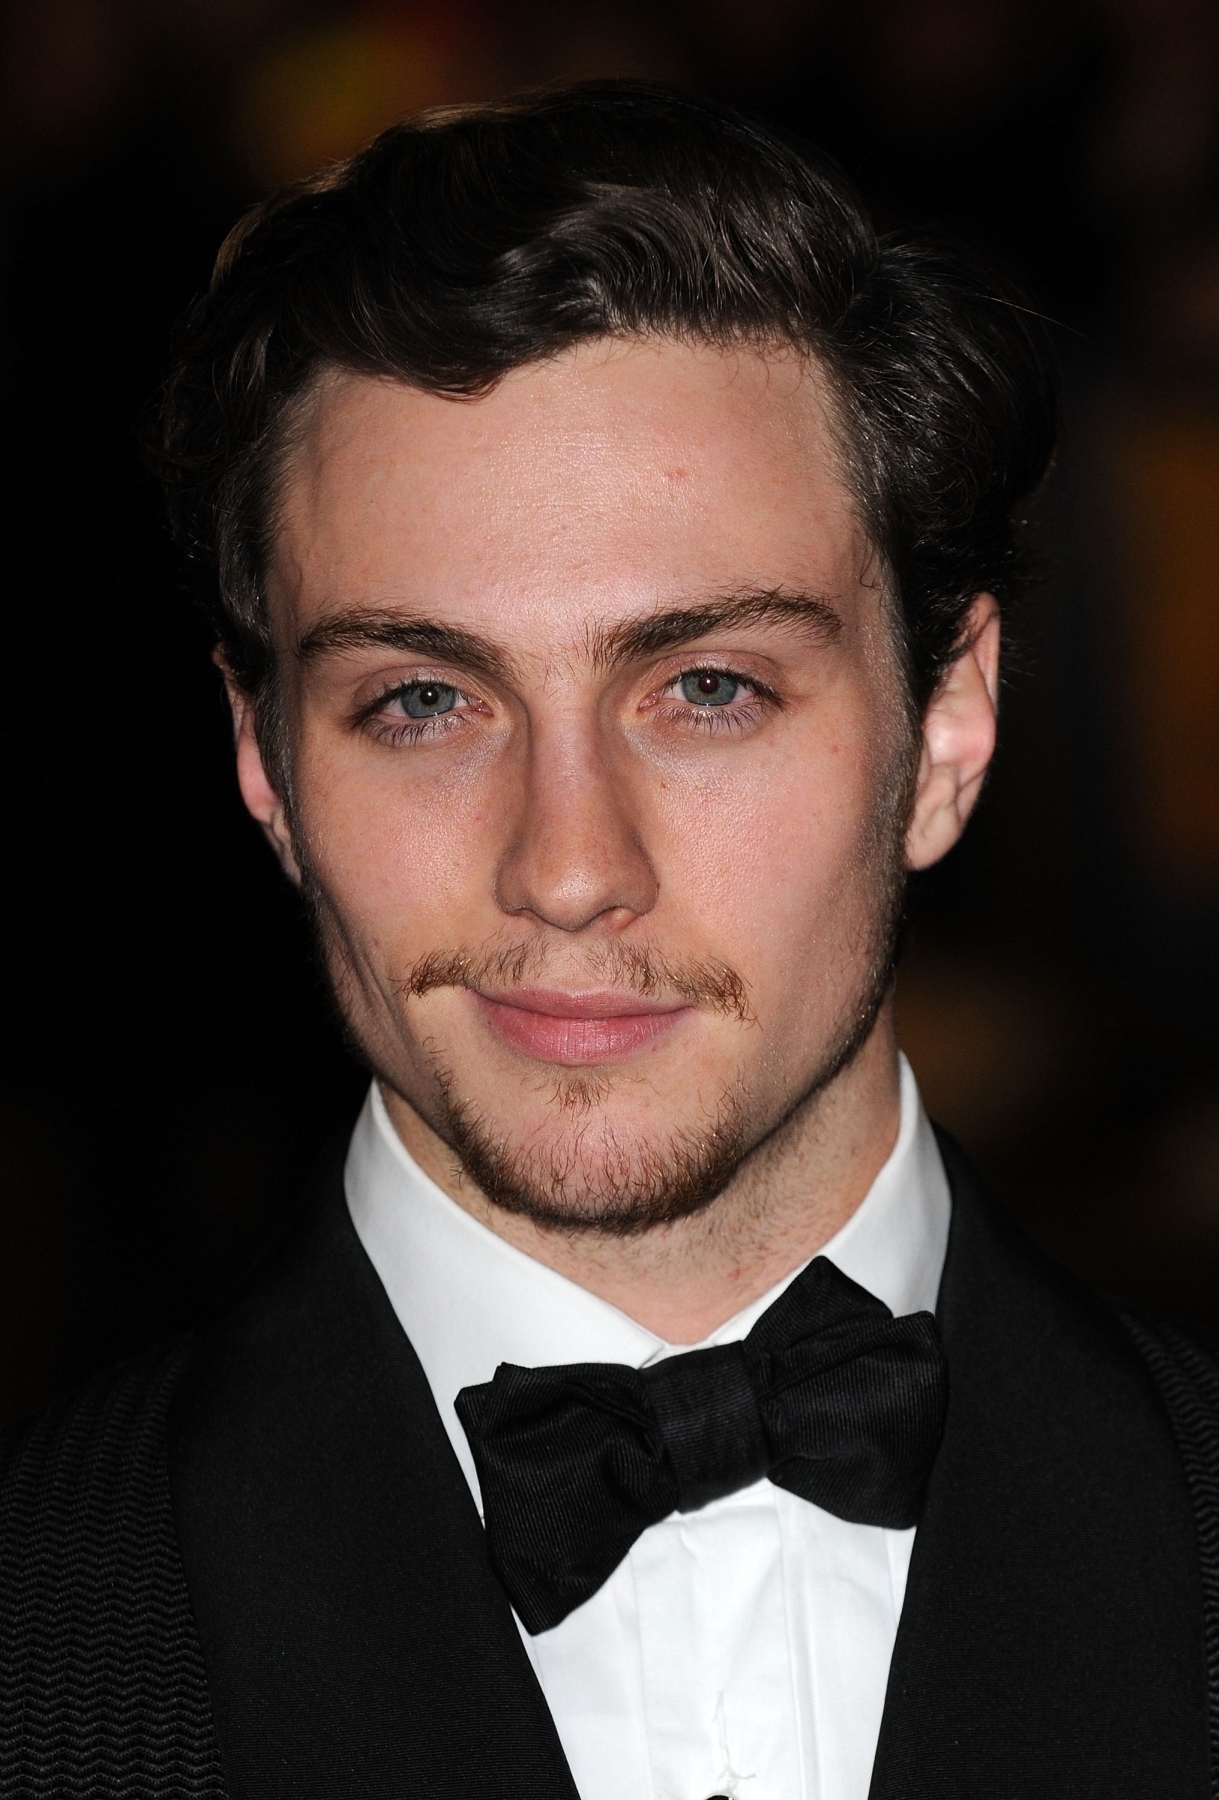 Aaron Taylor Johnson Wallpapers High Quality Download Free